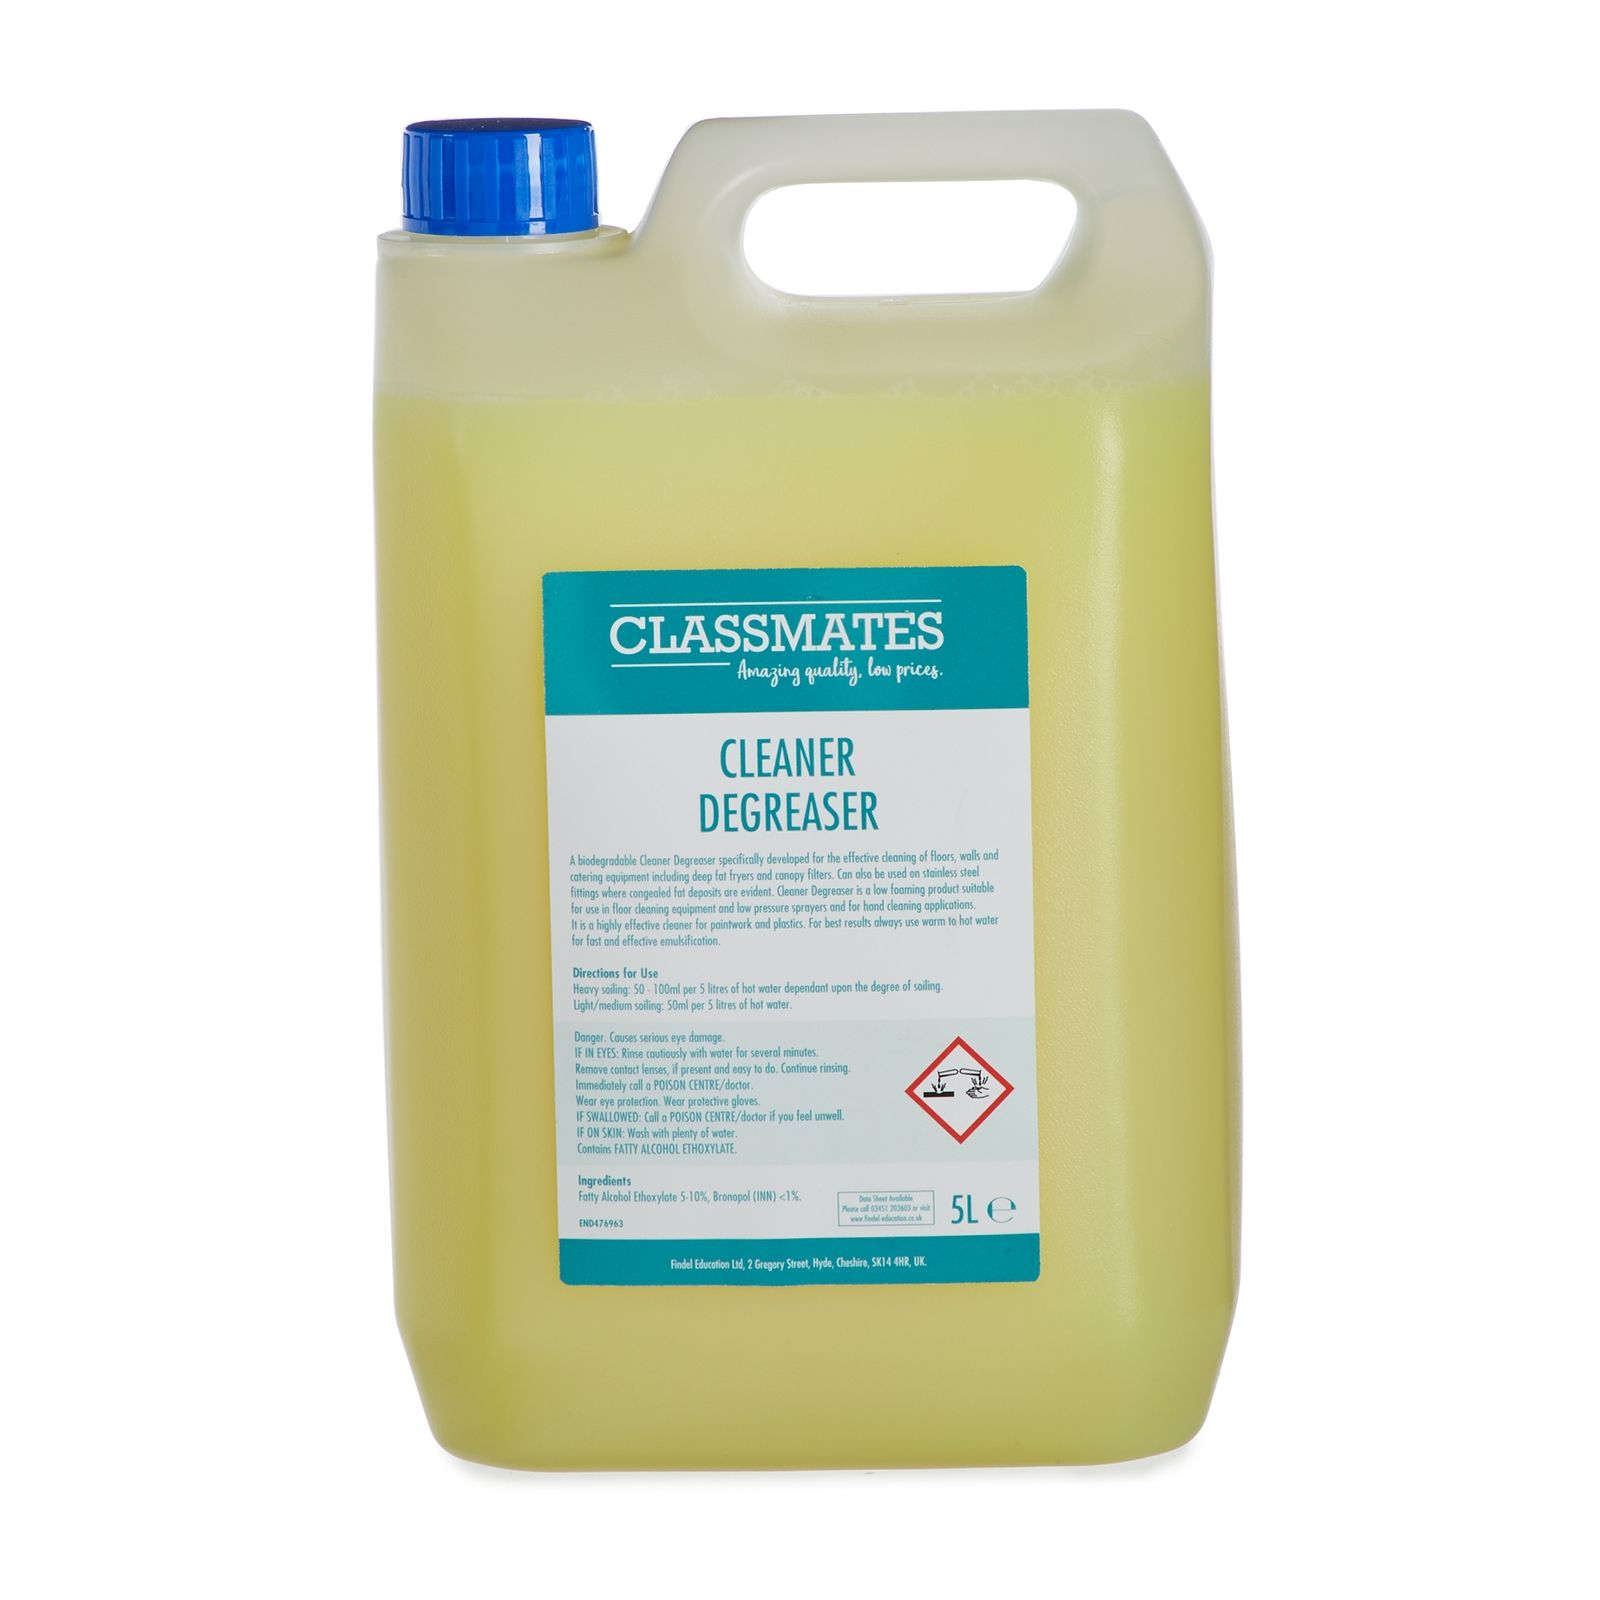 Classmates Cleaner and Degreaser